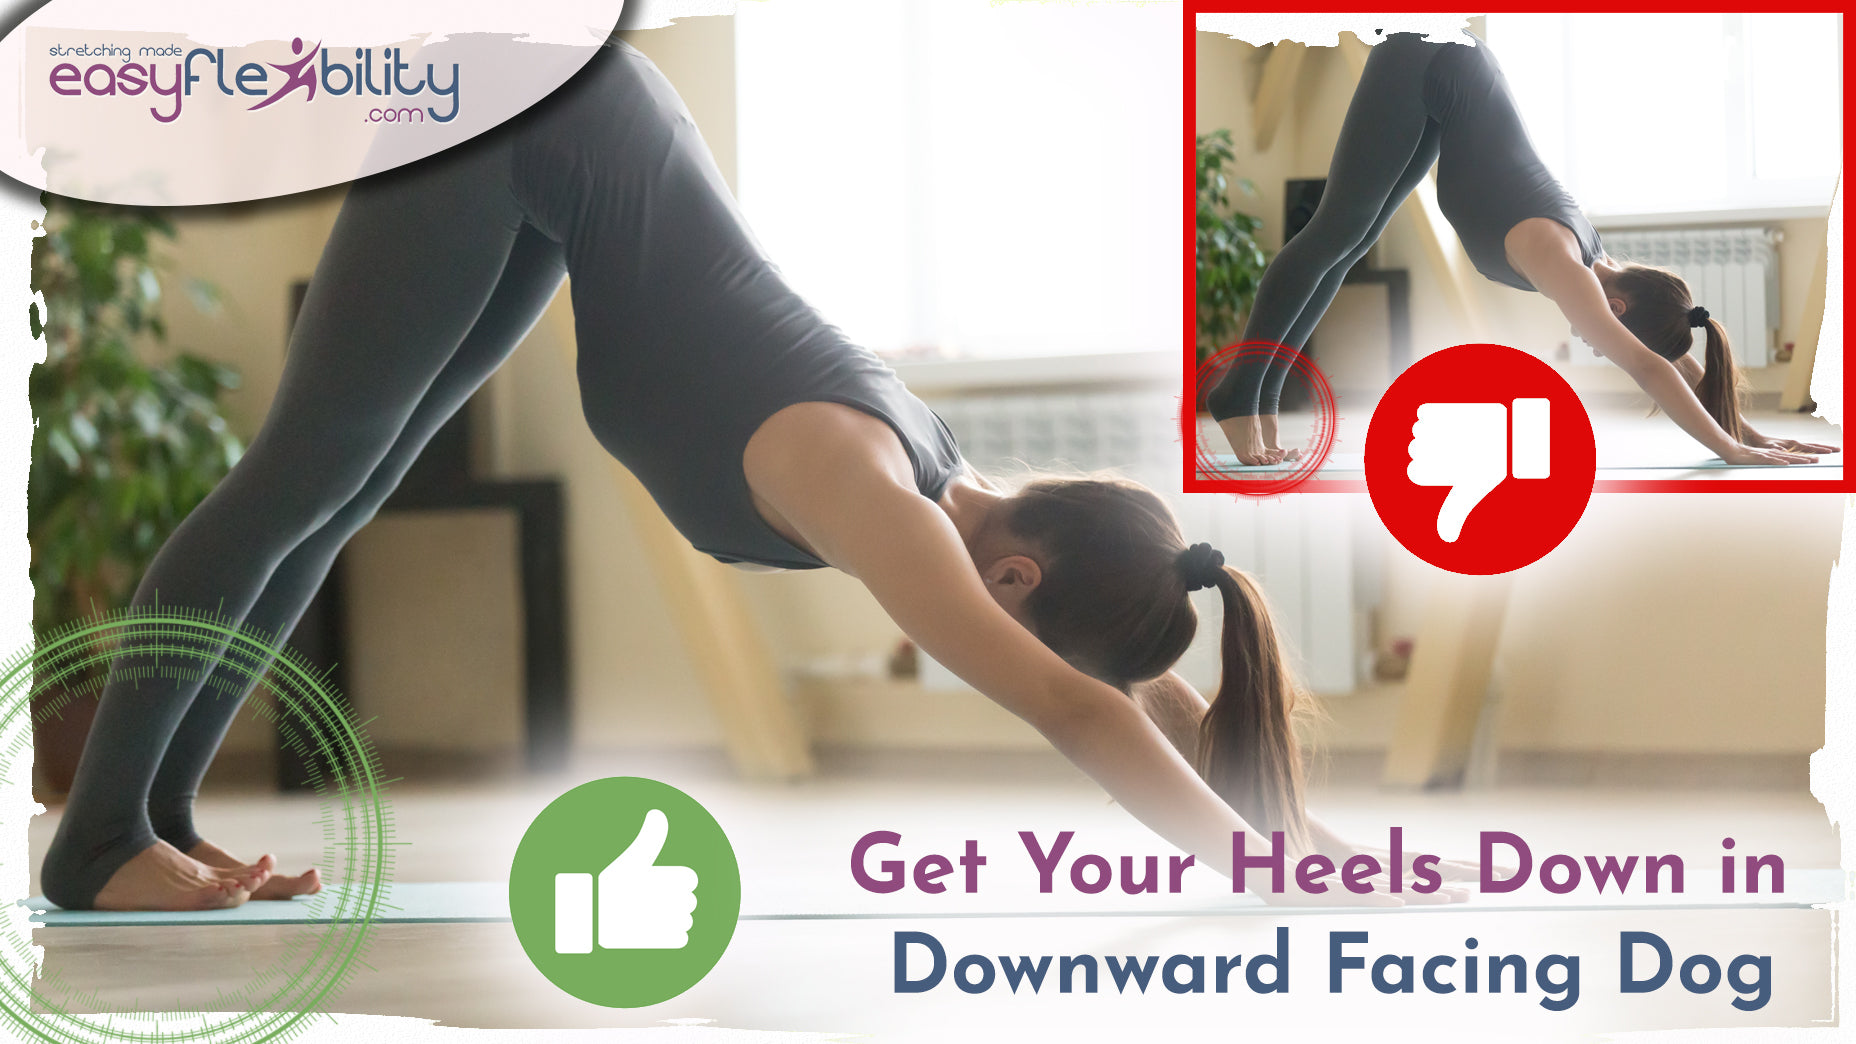 Get Your Heels Down in Downward Facing Dog